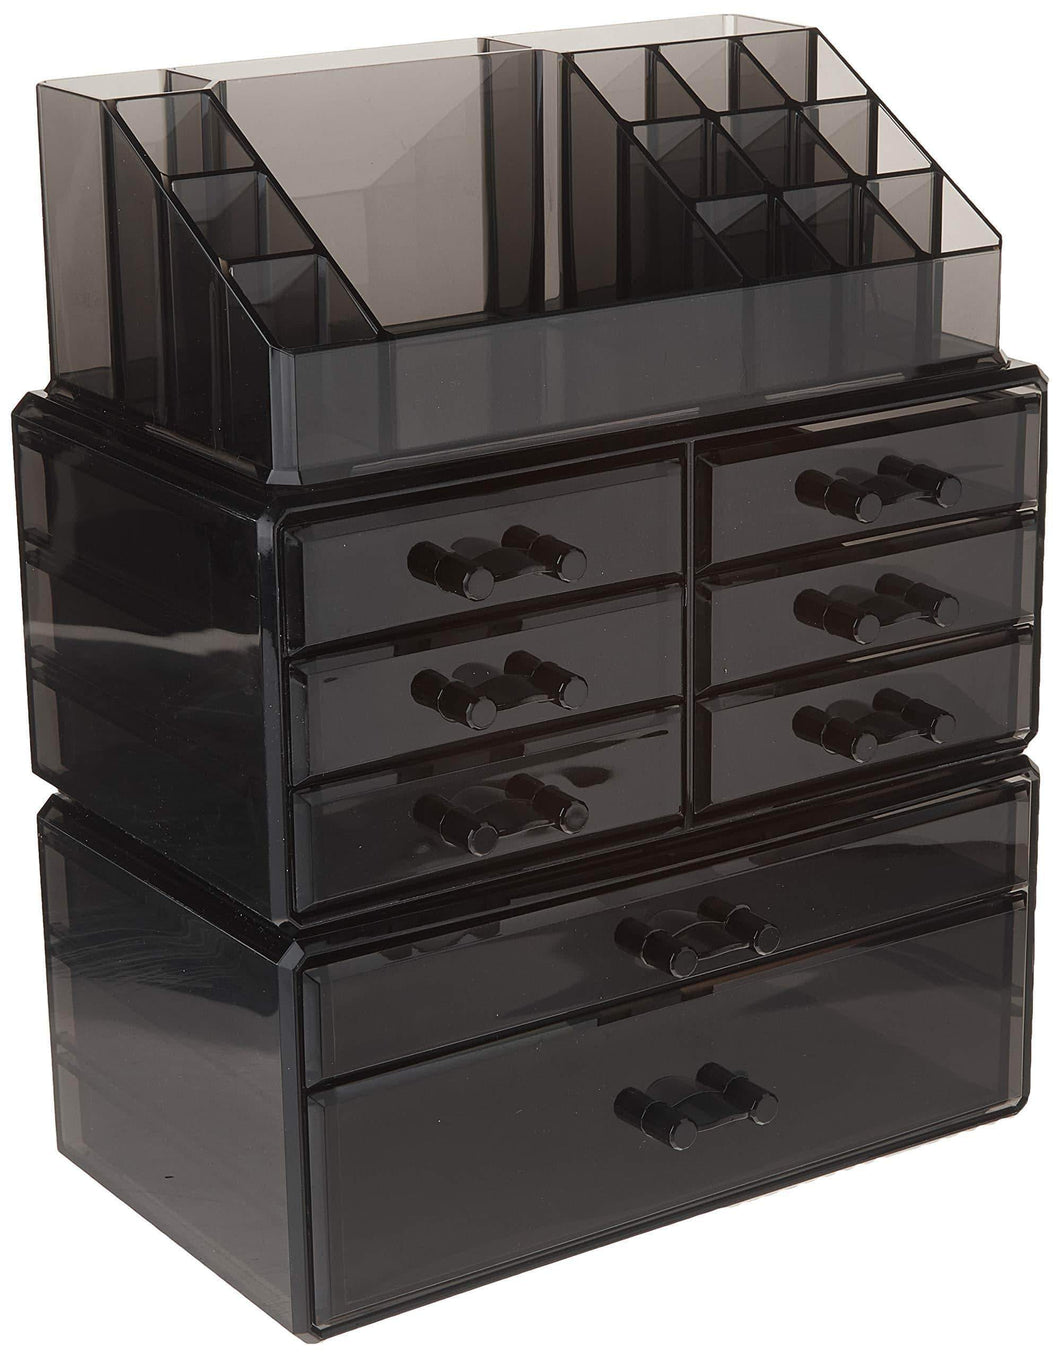 Related songmics makeup organizer 8 drawers cosmetic storage 3 pieces set jewelry display case with 16 top compartments black ujmu08b